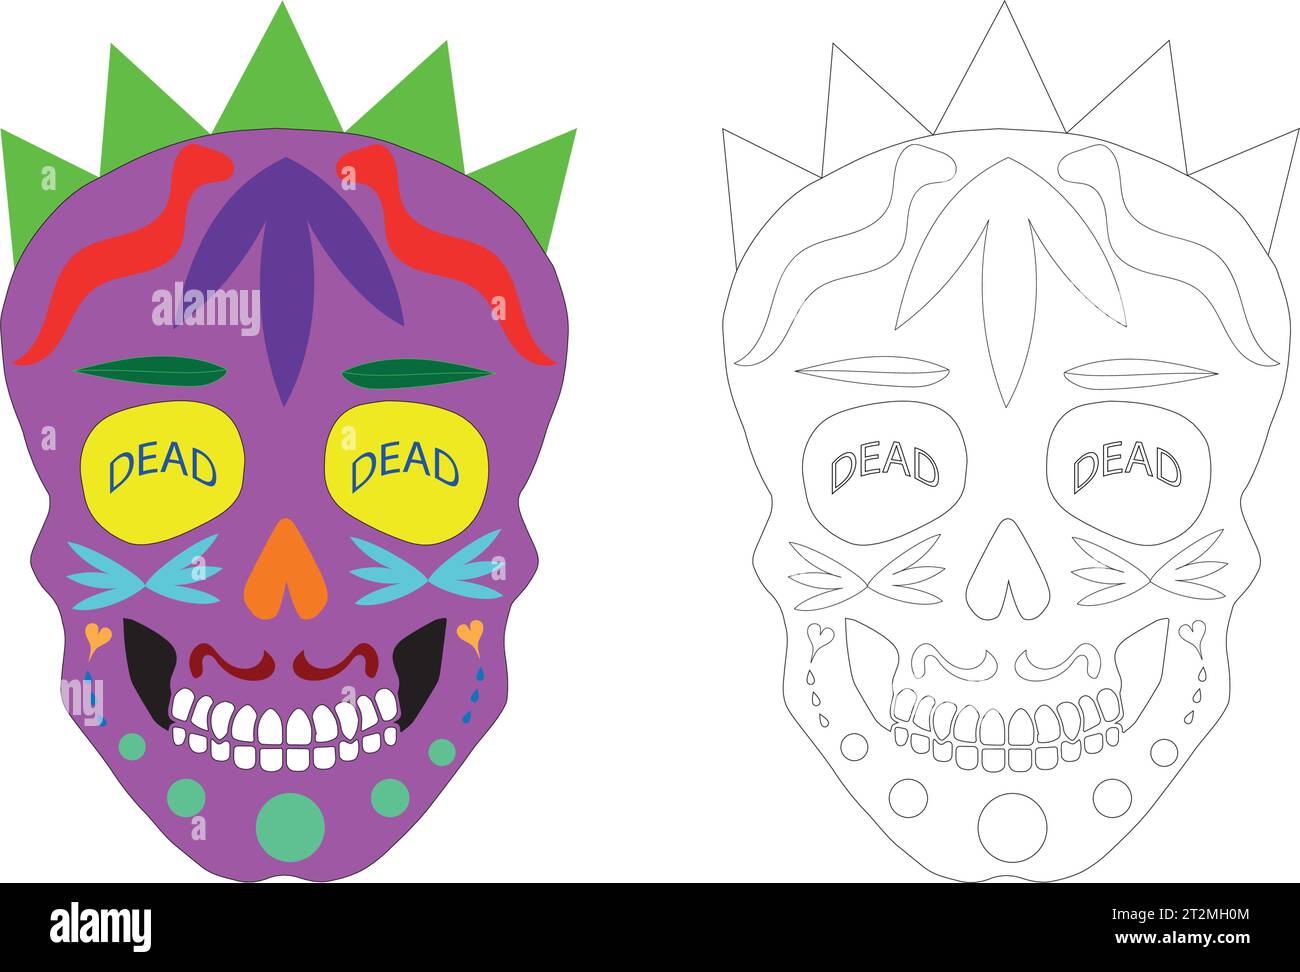 Dia Los Muertos, Day of the Dead or Mexican Halloween. Decorations with flowers can be used for painting. Skull vector illustration background. Stock Vector